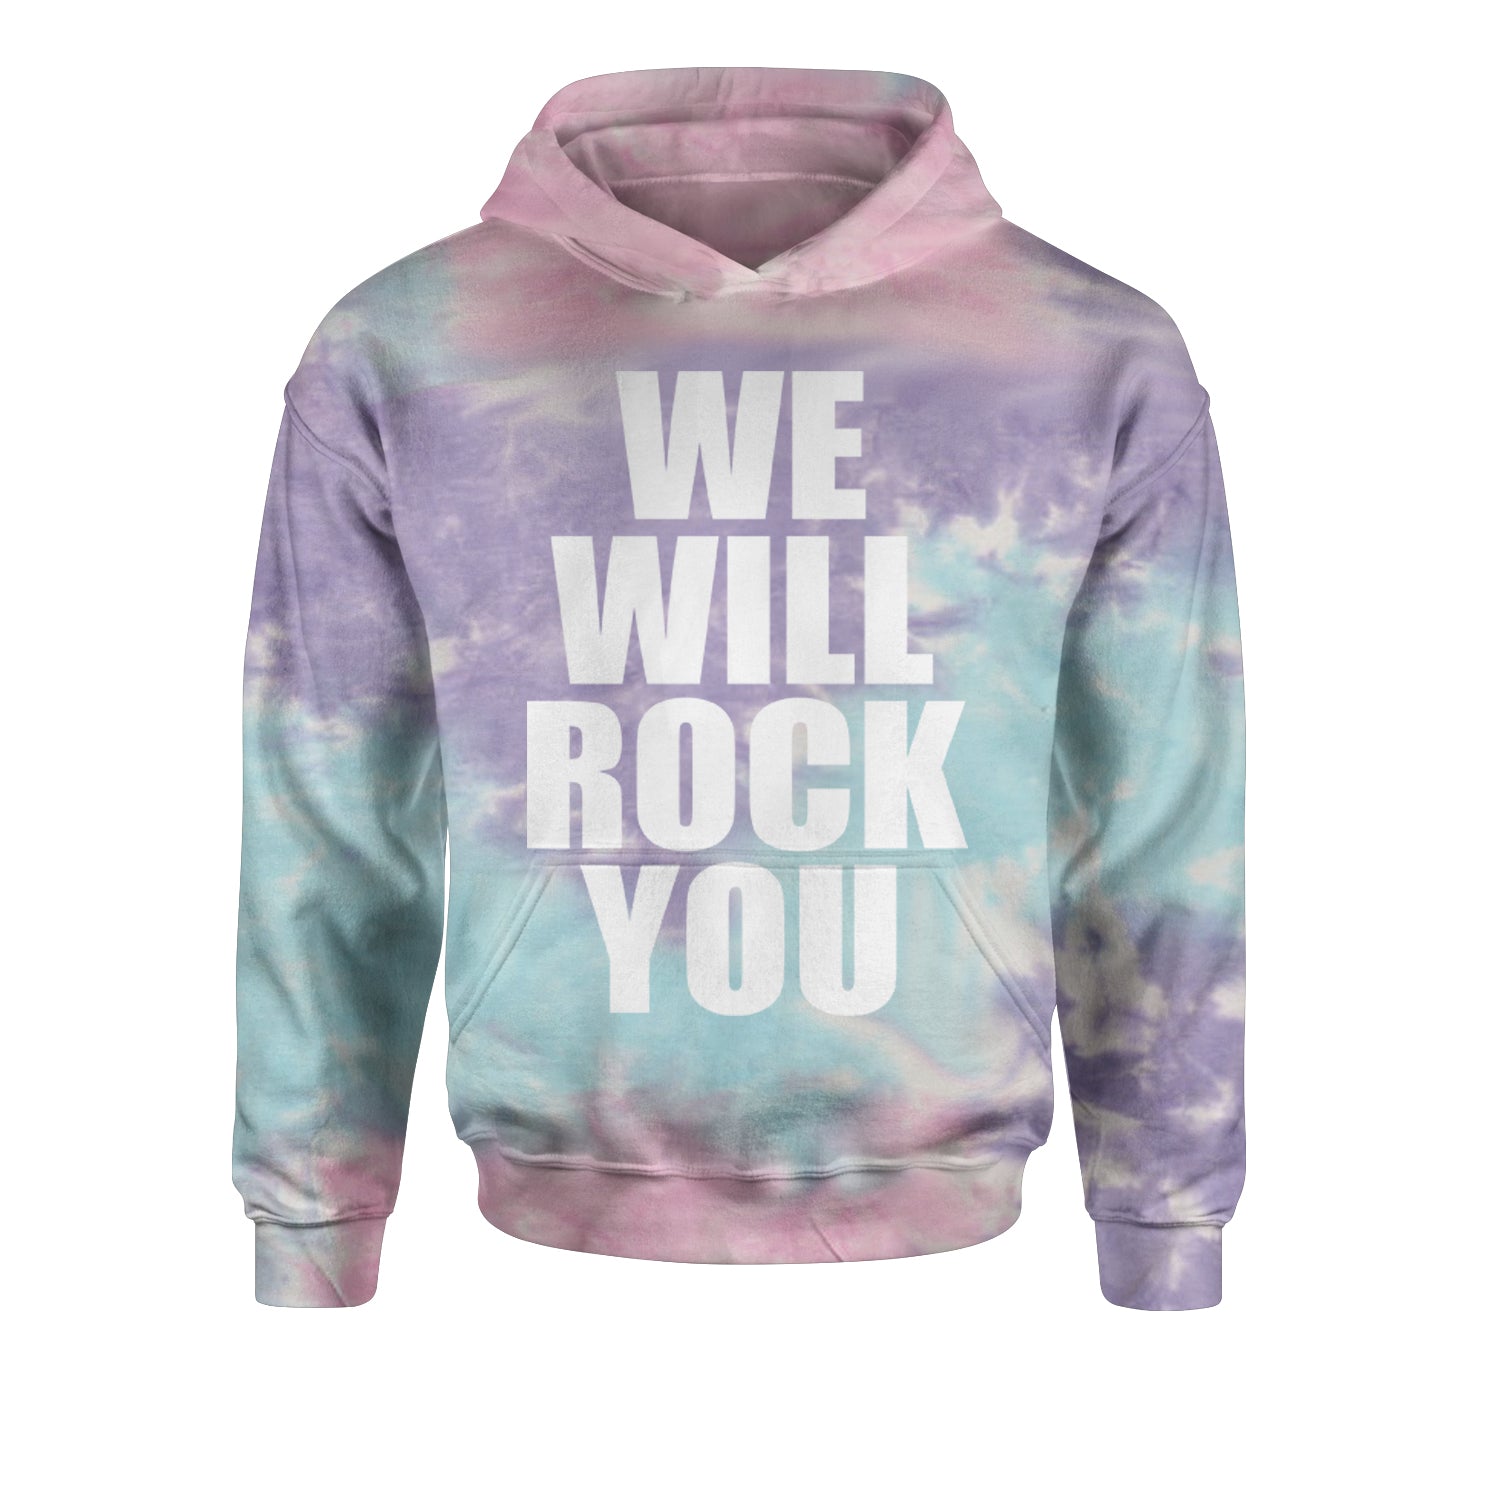 We Will Rock You Youth-Sized Hoodie #expressiontees by Expression Tees